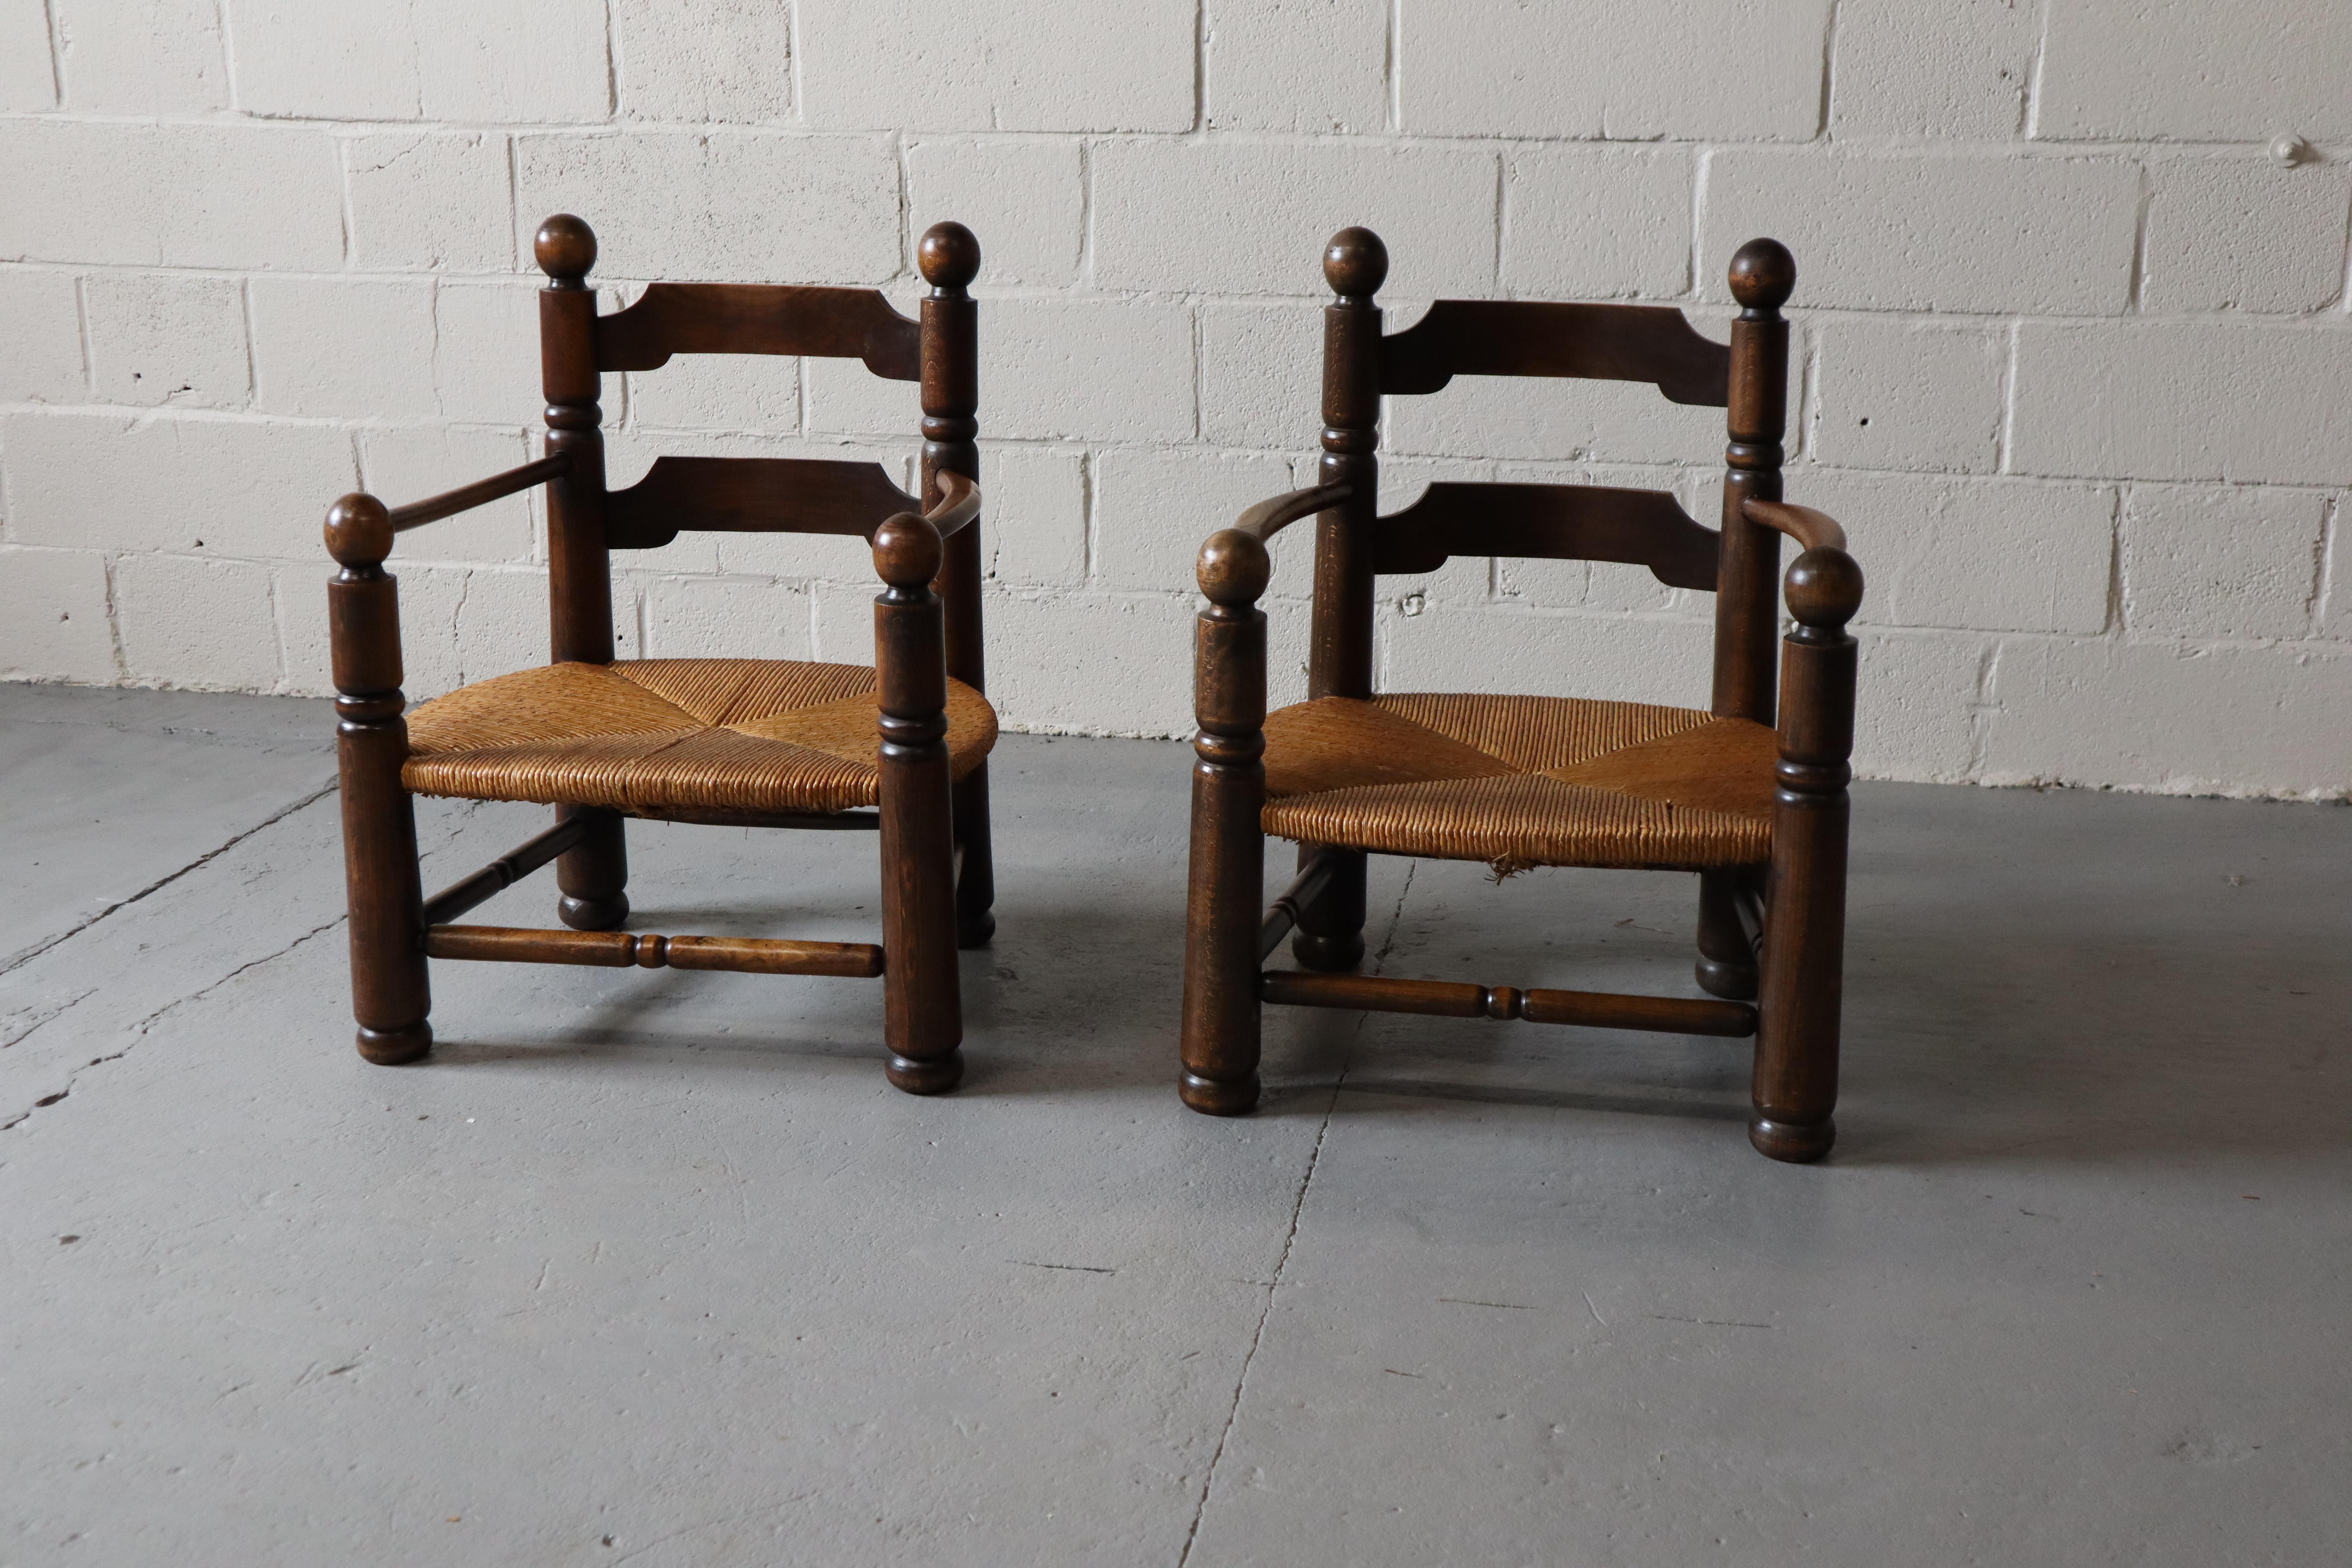 Pair of carved oak armchairs with low rushed seats by French designer Charles Dudouyt, 1940's. He designed these chairs as fireplace chairs.

